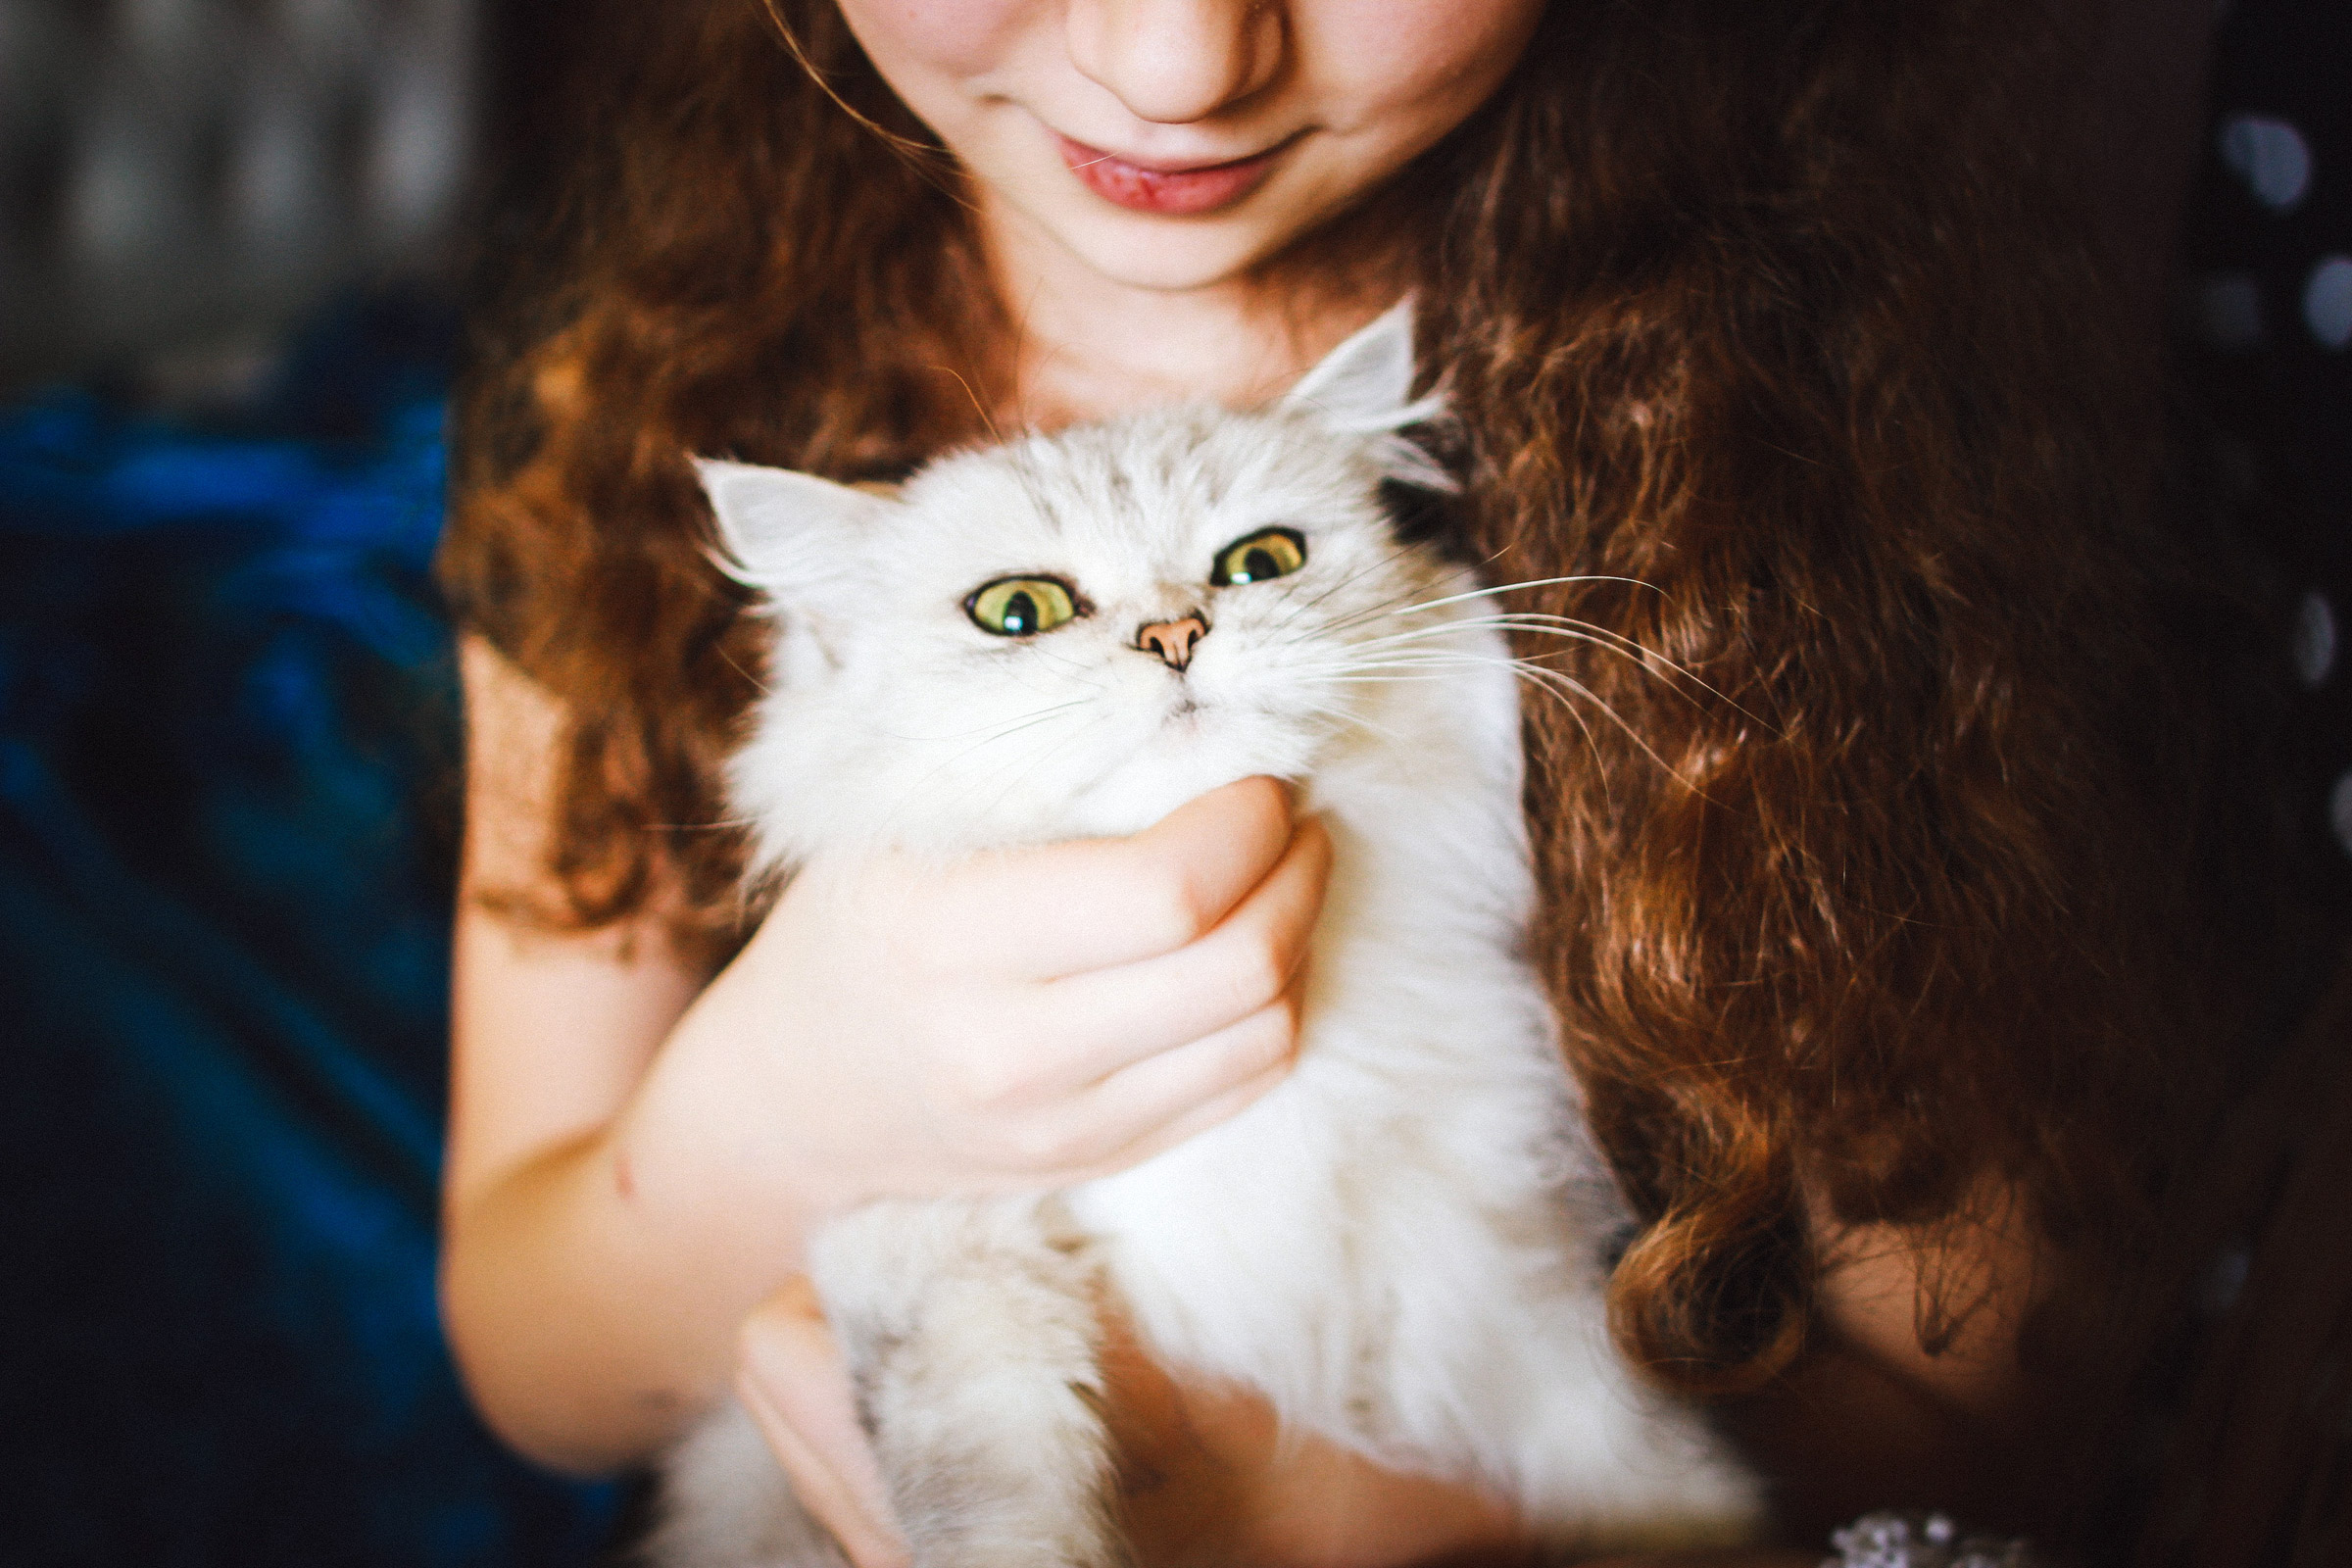 As your cat ages, changes occur in his or her physical condition that warrant more frequent trips to the veterinarian.